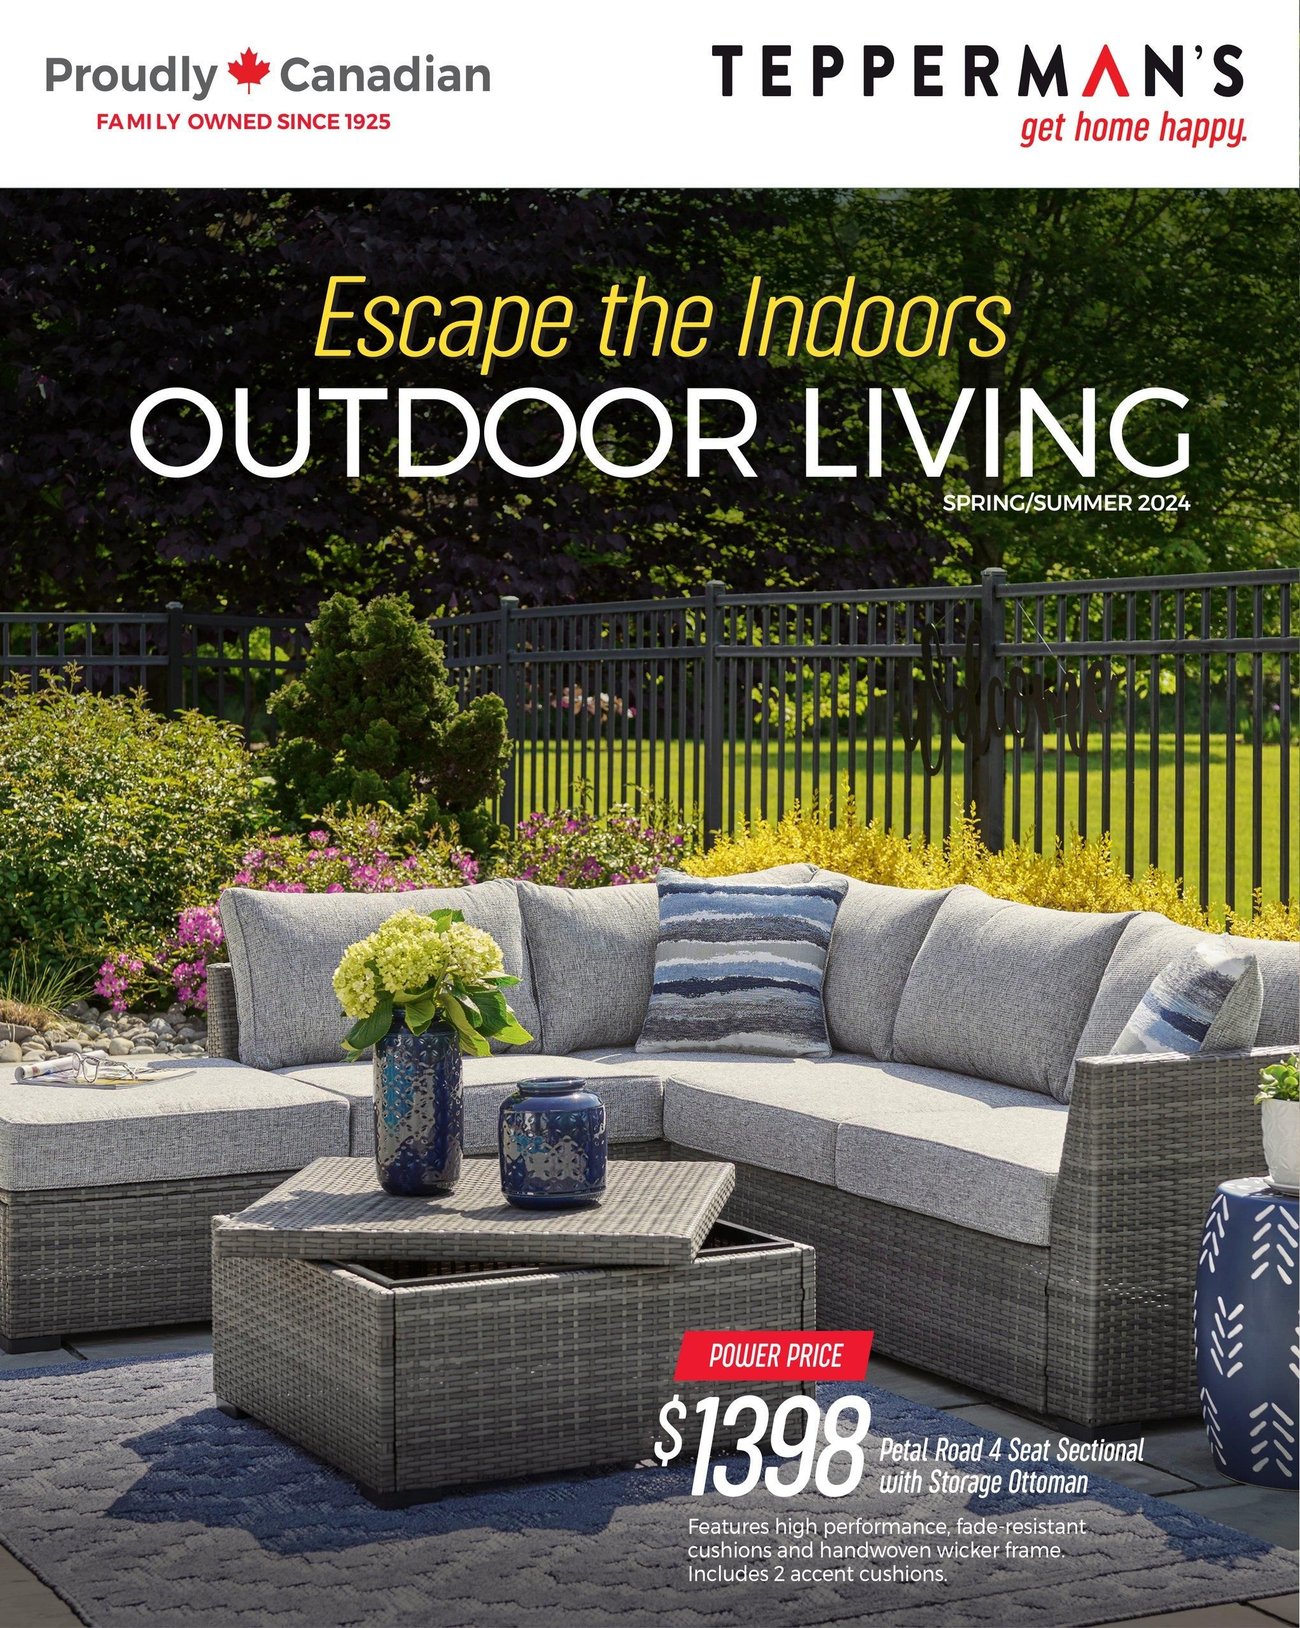 Tepperman's - Outdoor Living - Page 1